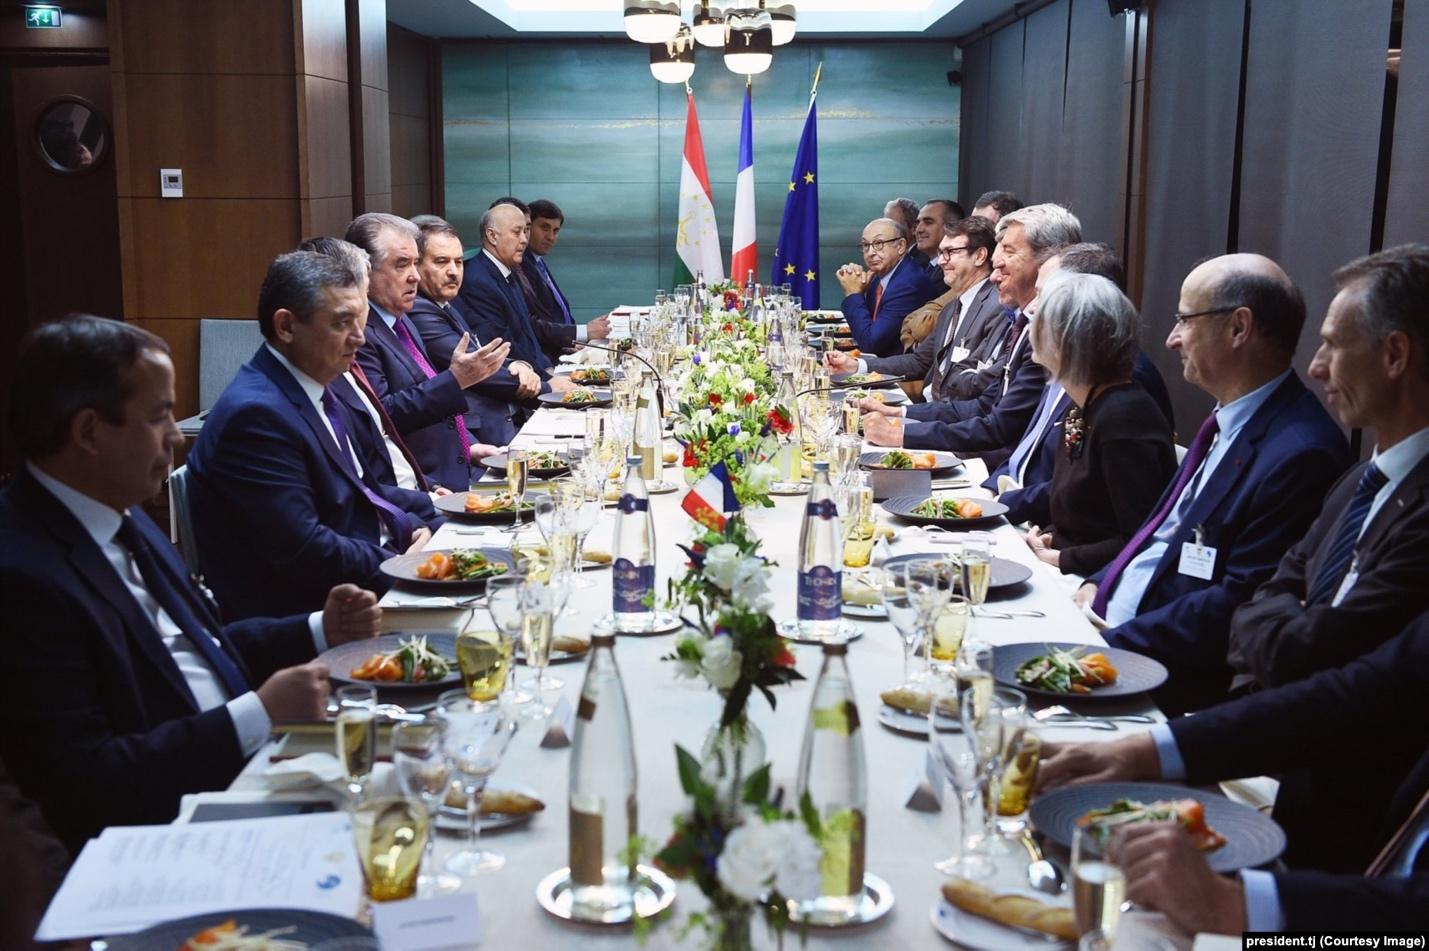 Tajik President Emomali Rahmon (left, gesturing) at a meeting of the Tajik-French Business Council in Paris on November 17, 2019. As a result of the meeting, Rahmon's daughter's company, Sifat Pharma, signed an agreement with a French partner.